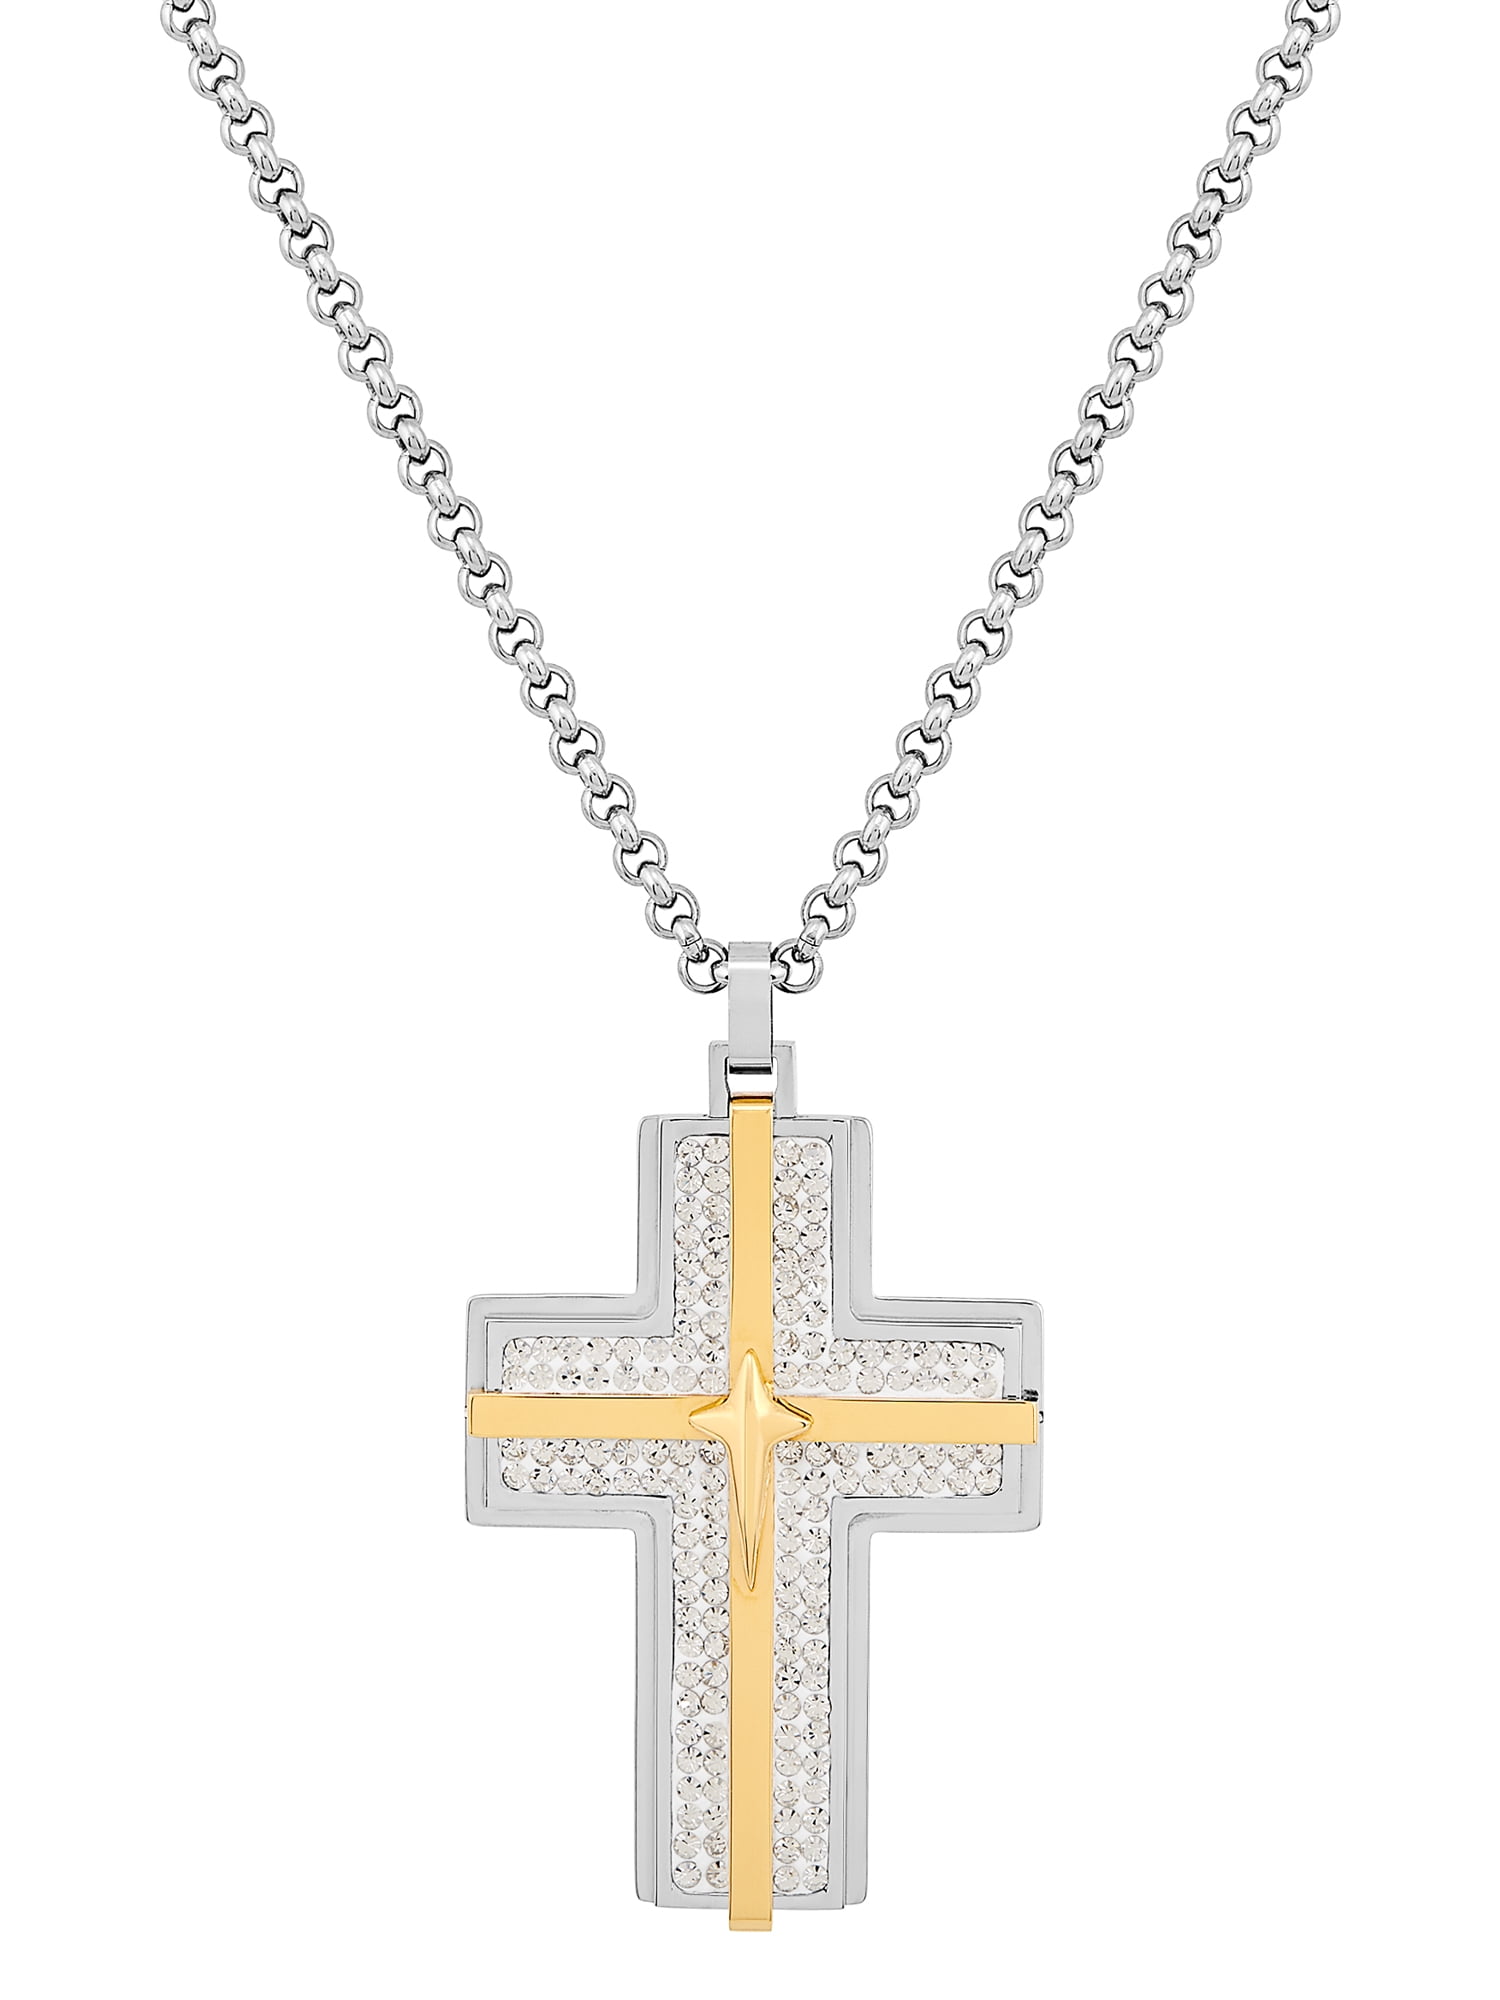 MEN 925 STERLING SILVER ICED 3D CROSS PENDANT+18-36"X3MM CURB LINK NECKLACE*SP26 